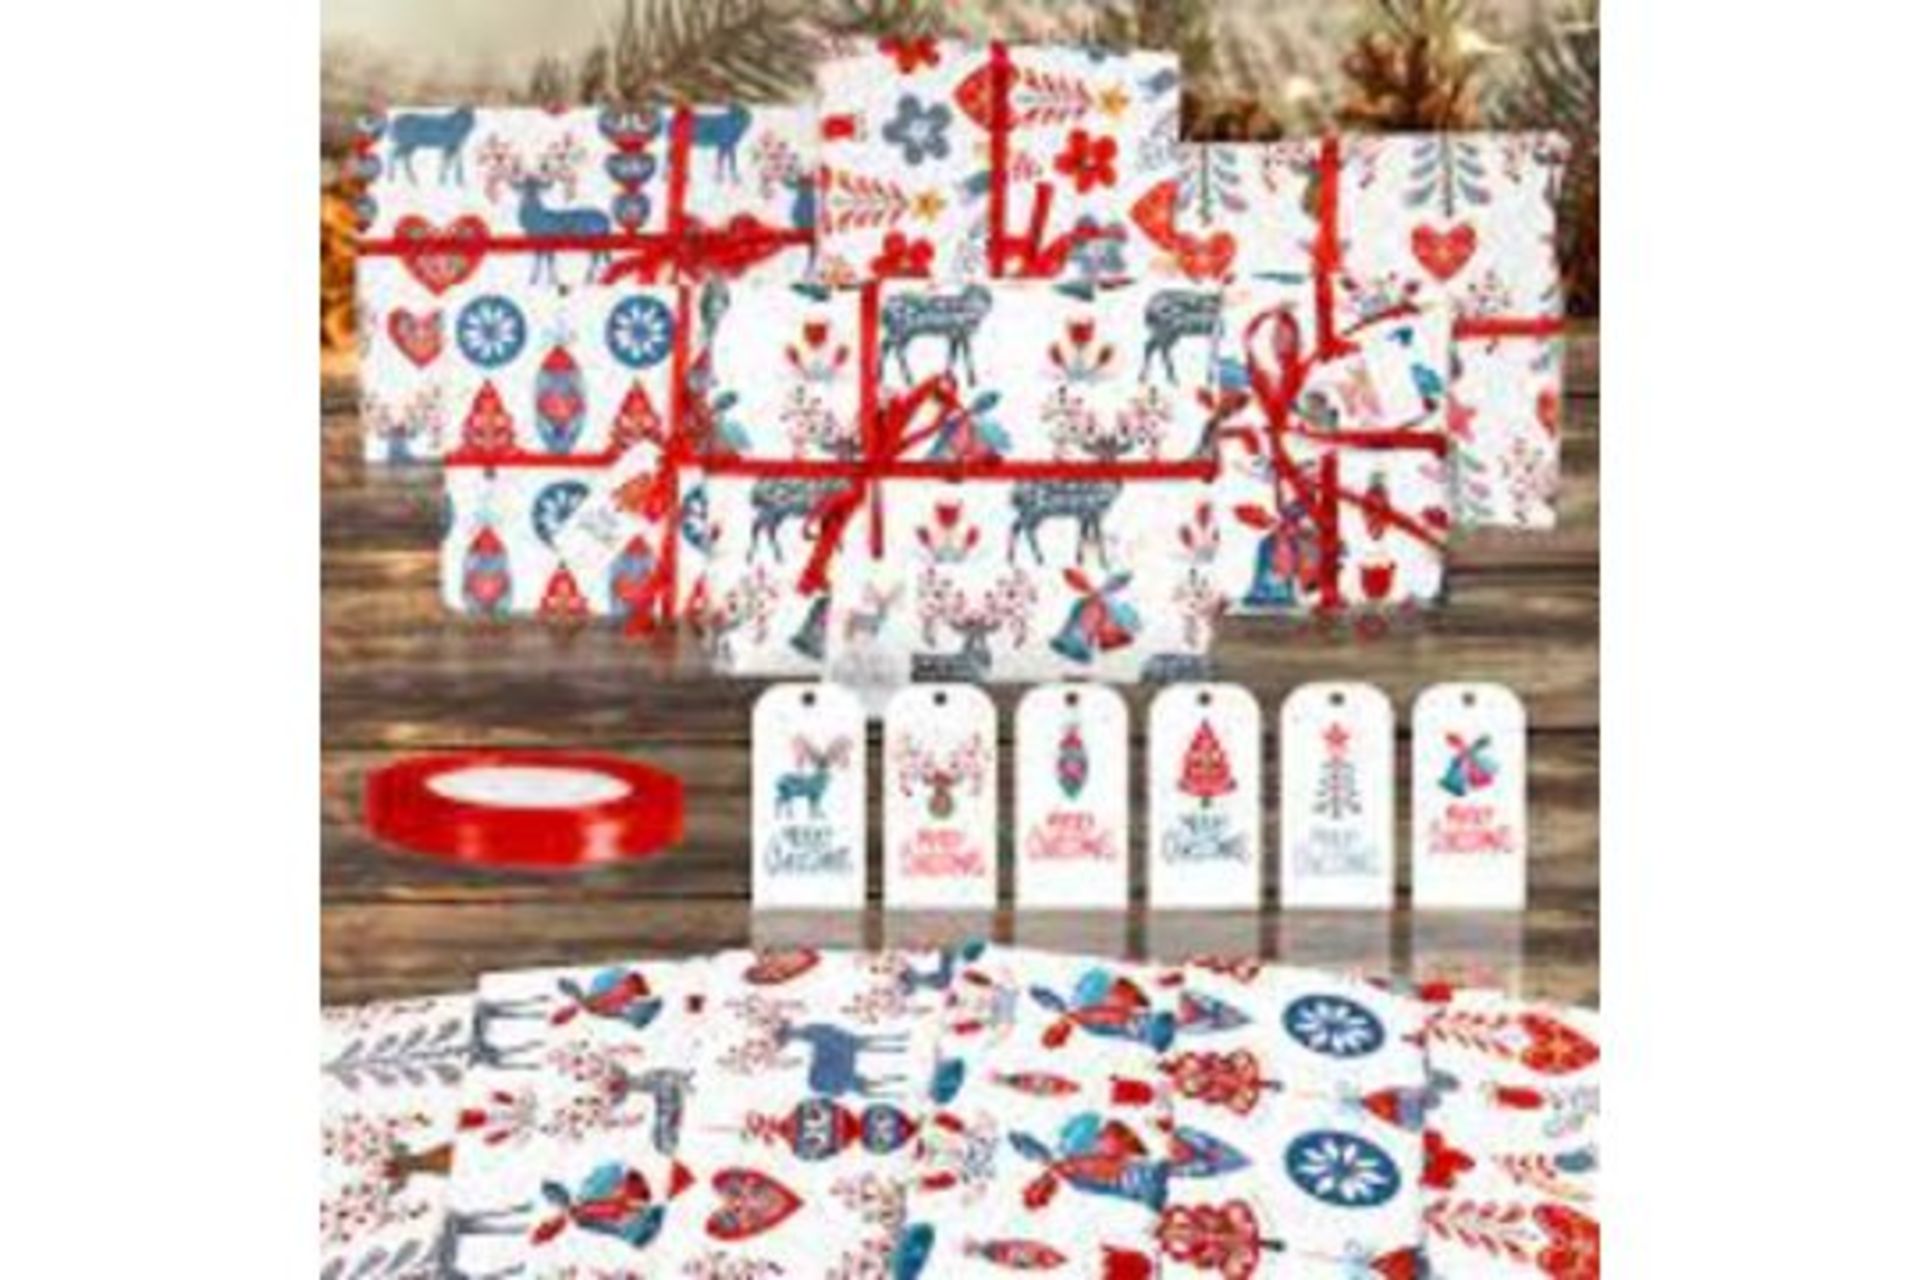 TRADE LOT 300 X BRAND NEW ASSORTED SETS OF 6 FOLDED SHEETS LUXURY CHRISTMAS WRAPPING PAPER SETS IN - Image 2 of 4